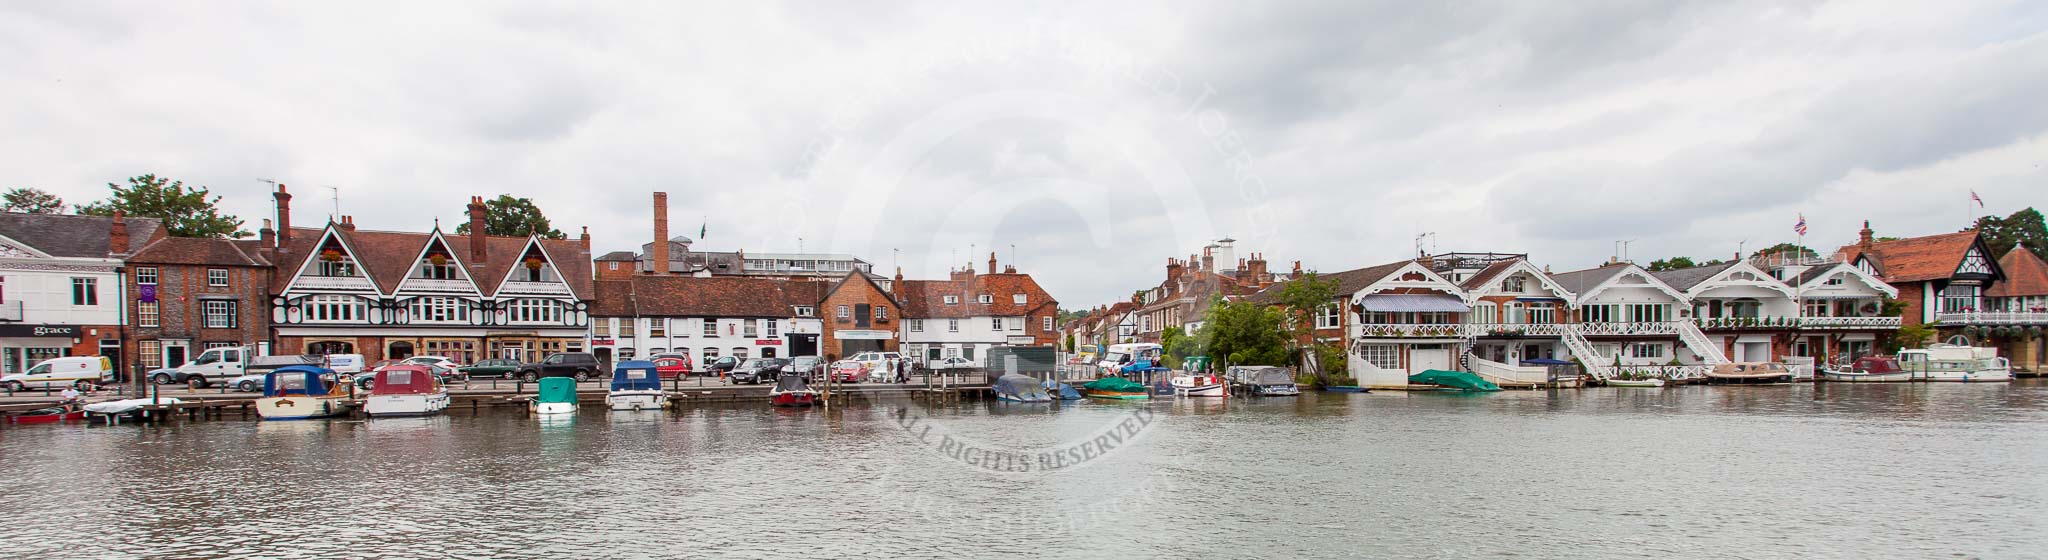 Henley Royal Regatta 2013 (Monday): Henley-on-Thames seen across the river from the HRR boat tents..
River Thames between Henley and Temple Island,
Henley-on-Thames,
Berkshire,
United Kingdom,
on 01 July 2013 at 13:56, image #1